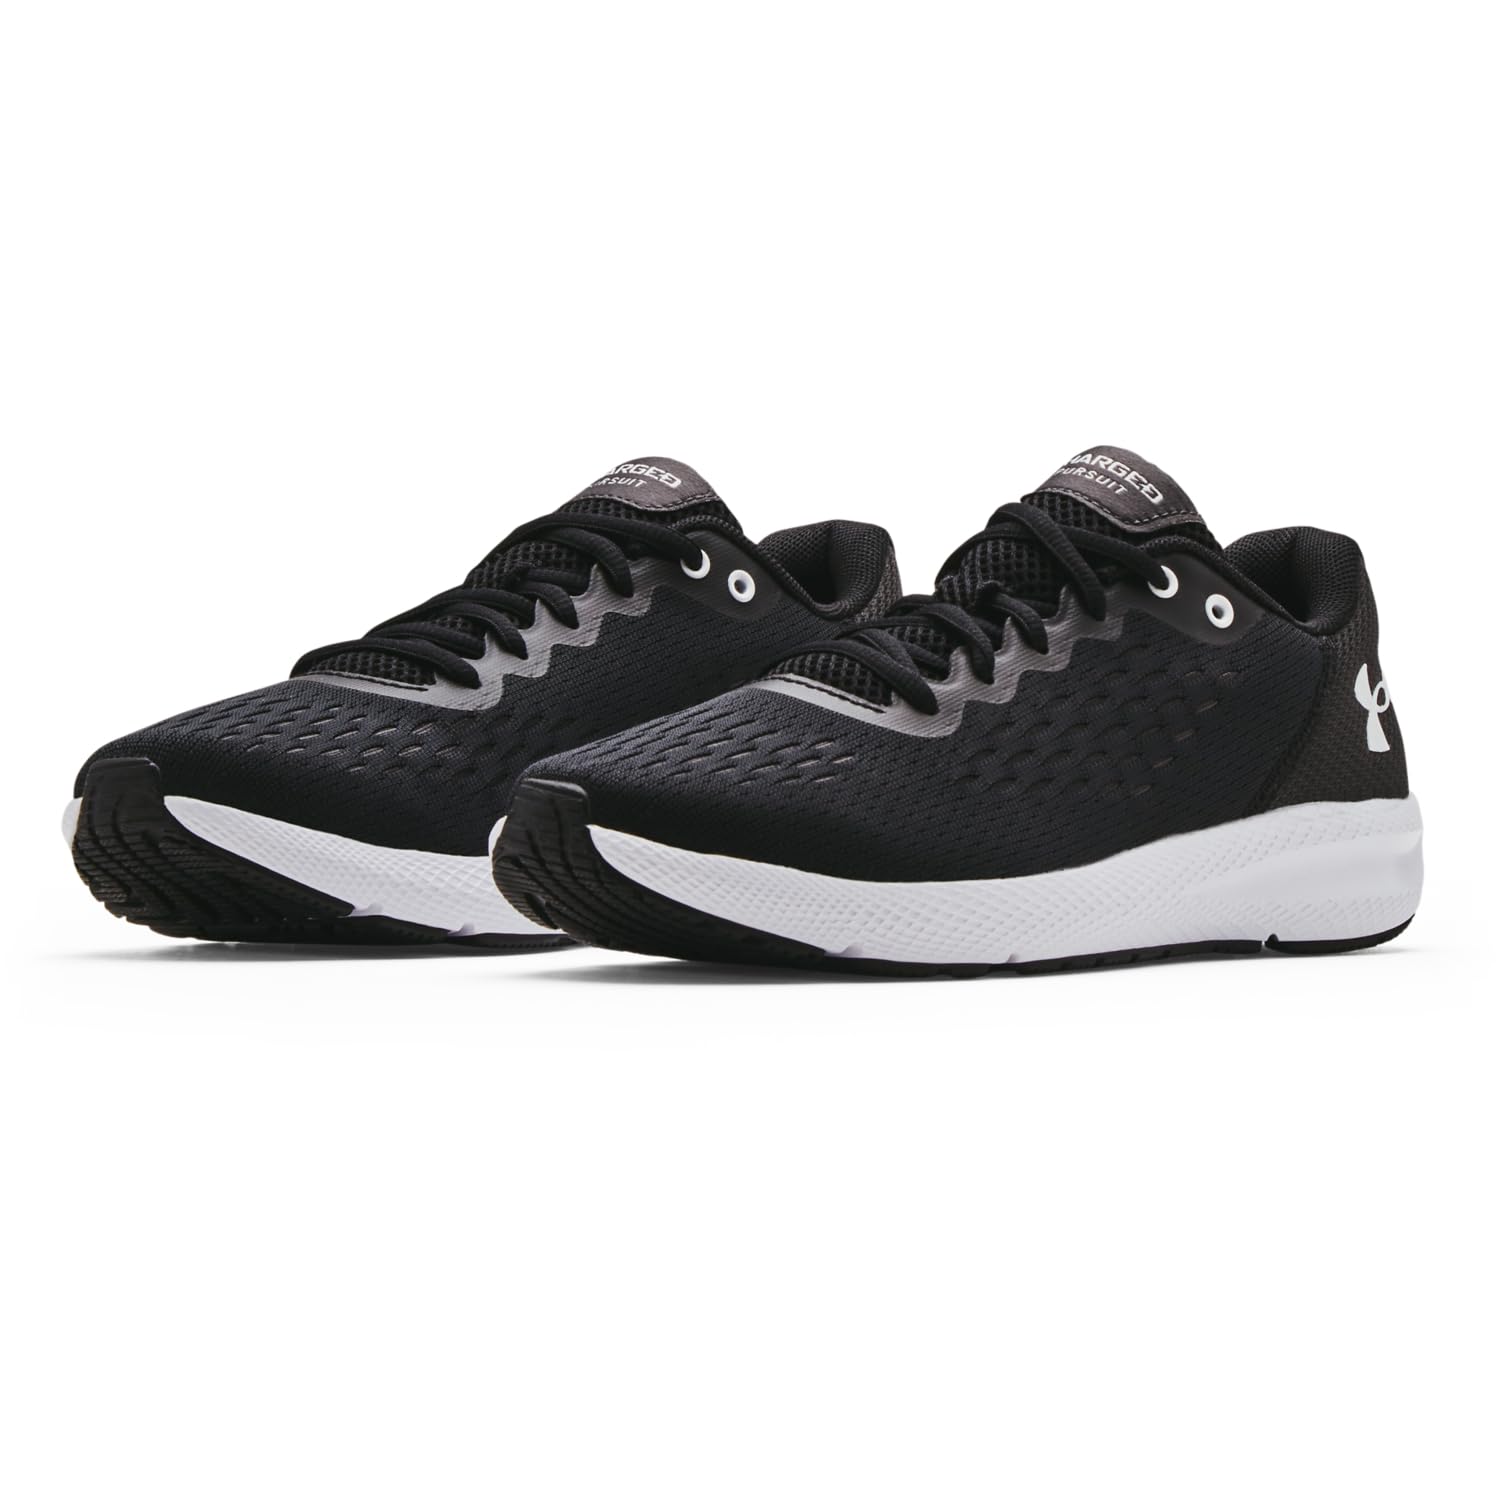 Under Armour Women's Charged Pursuit 2 Special Edition, Black (002)/White, 7.5 M US